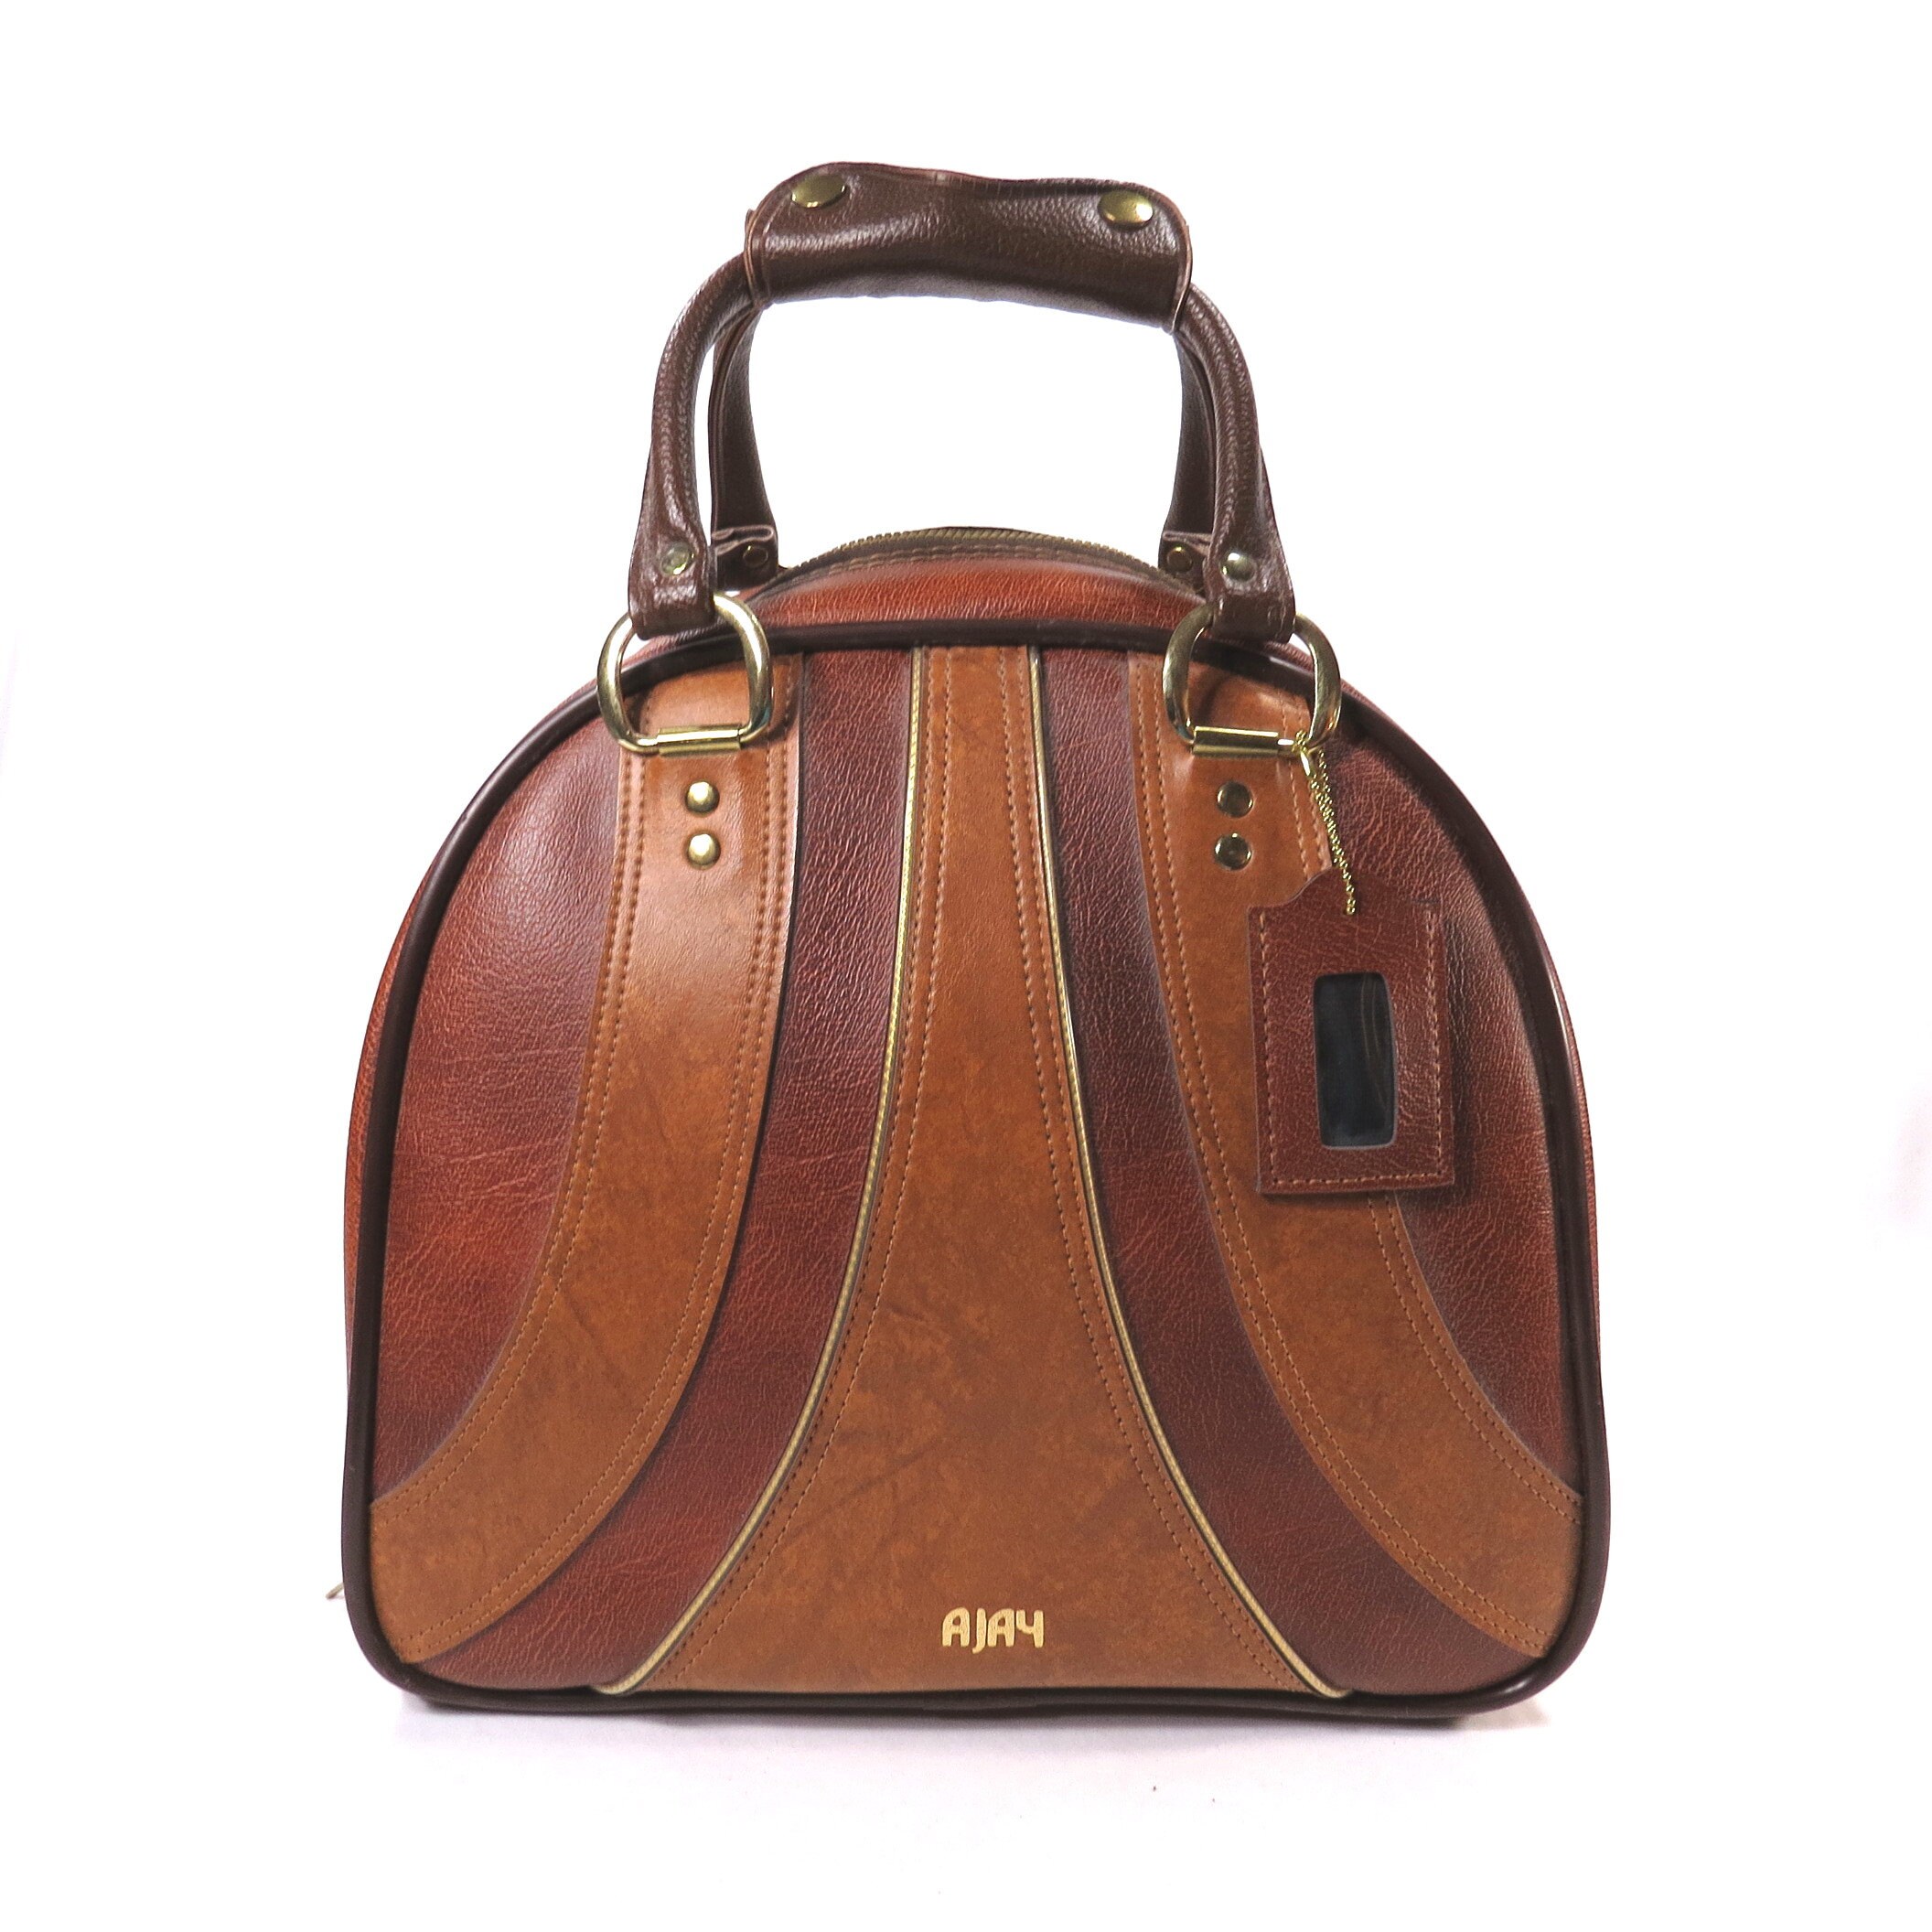 Sold at Auction: Hand Tooled Leather Bowling Bag Oklahoma 1958